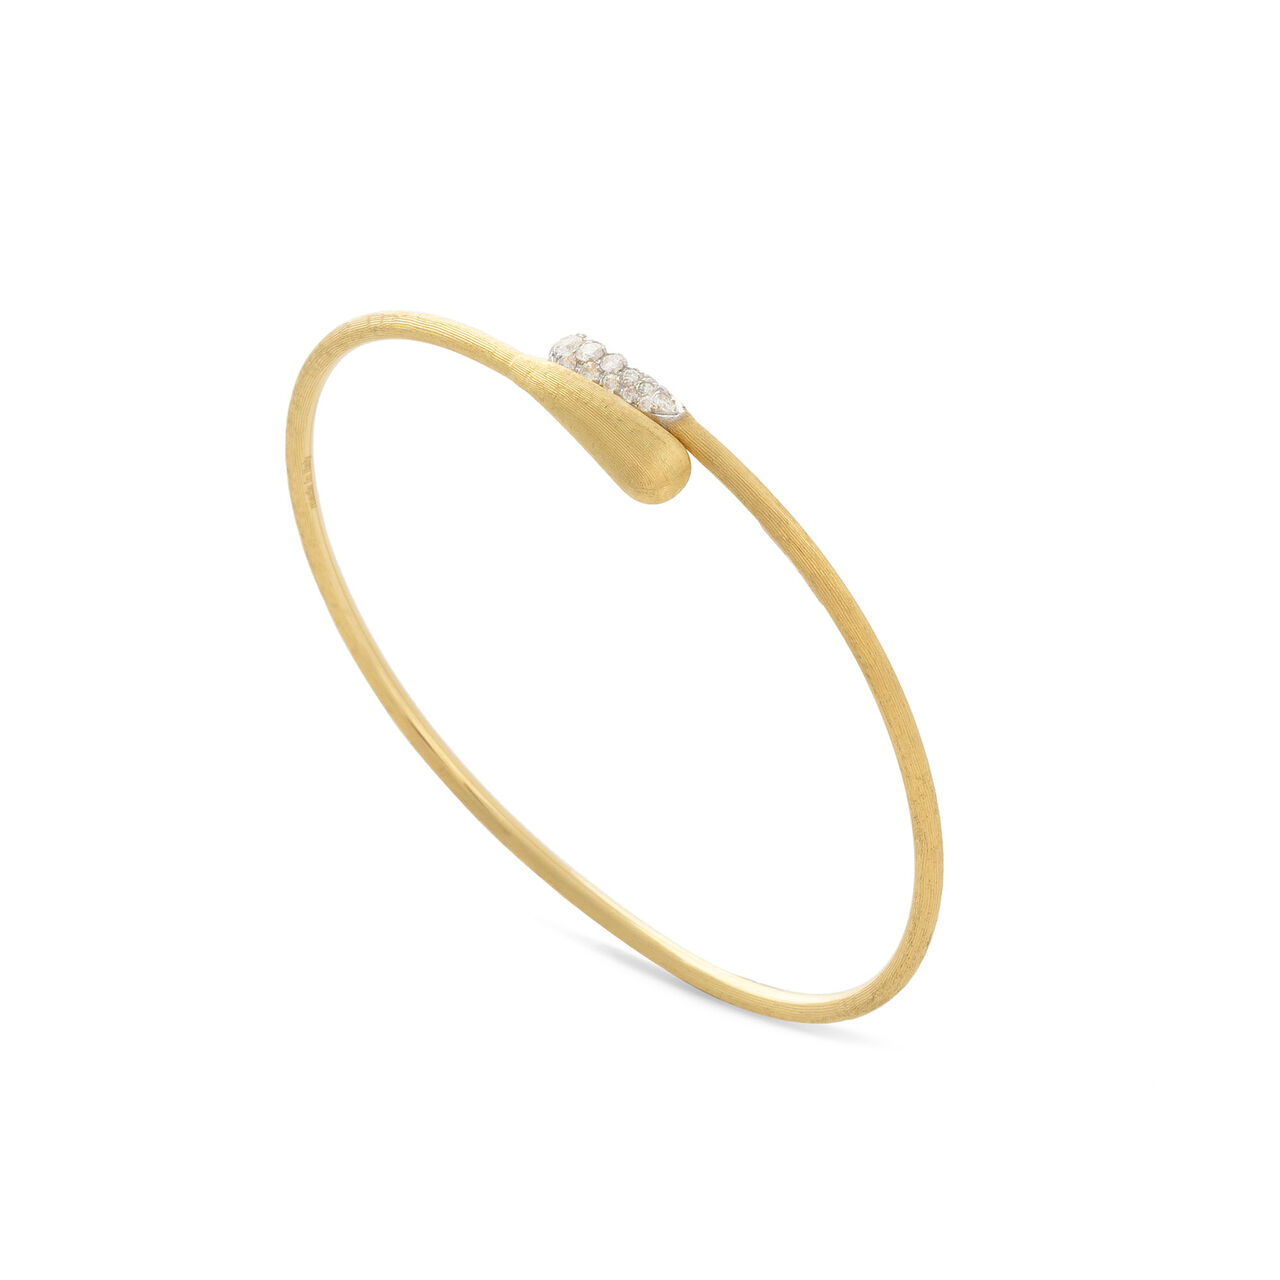 maison birks marco bicego lucia yellow gold and diamond hugging cuff bracelet sb110 b yw q6 image number 0